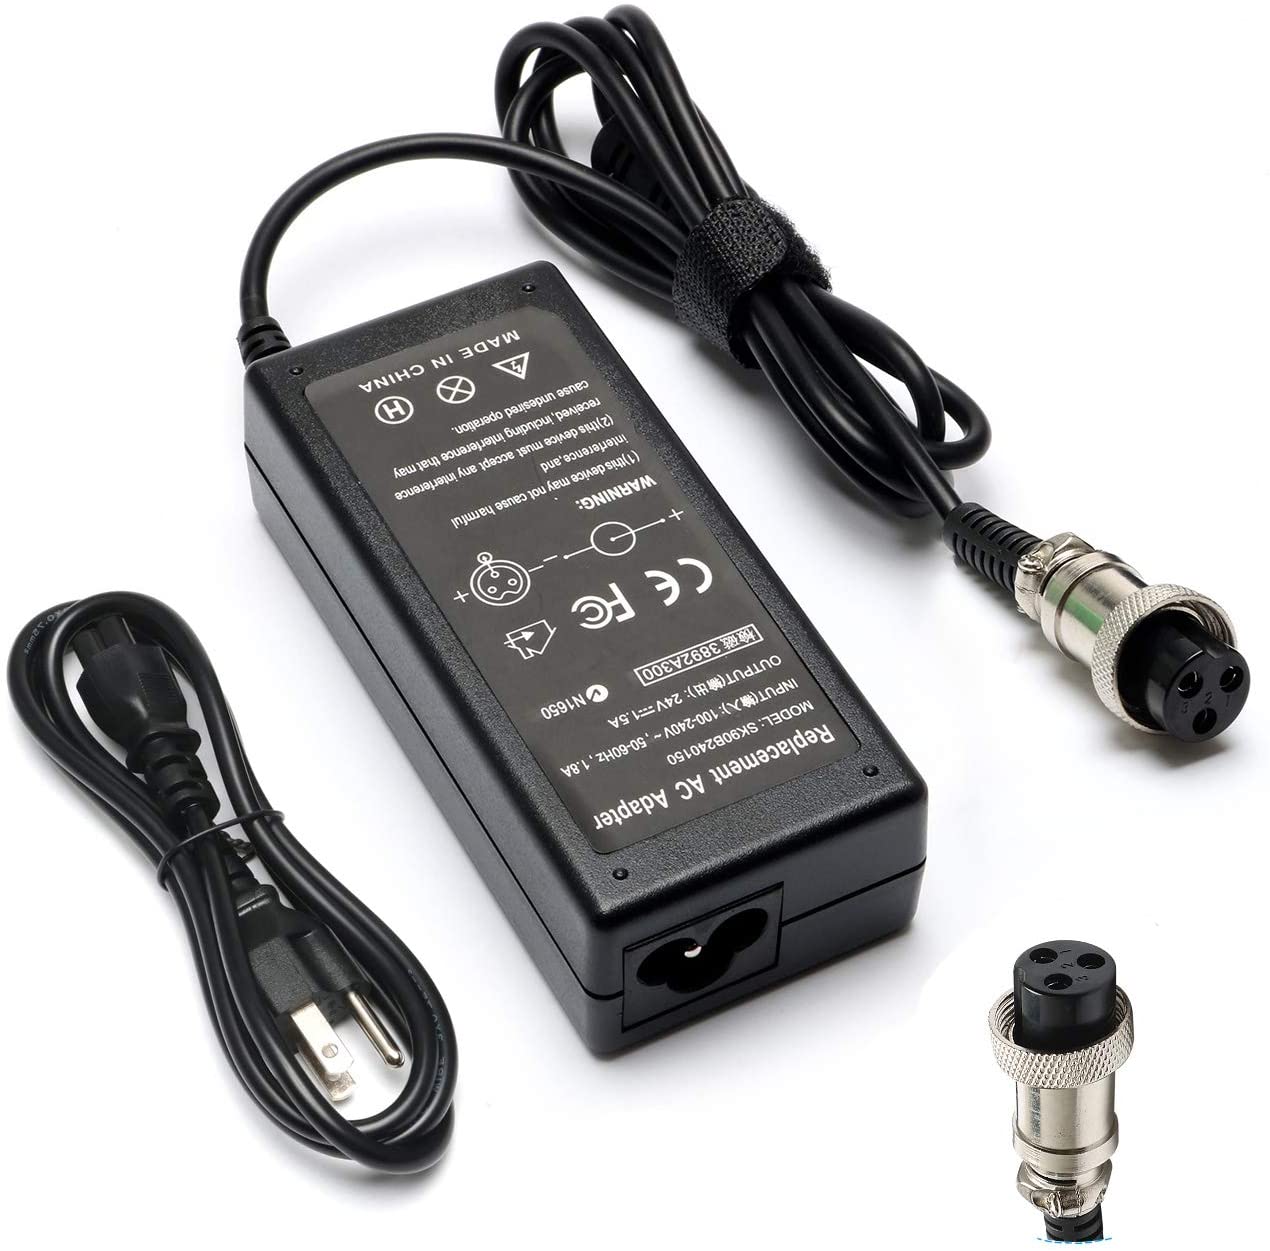 Buy Janboo 24V Scooter Battery Charger for Razor E100 E200 E200S E175 E300  E300S E125 E150 E500 PR200 E225S E325S MX350 MX400 Charger Power Supply Cord  Online in Vietnam. B08882NKP7